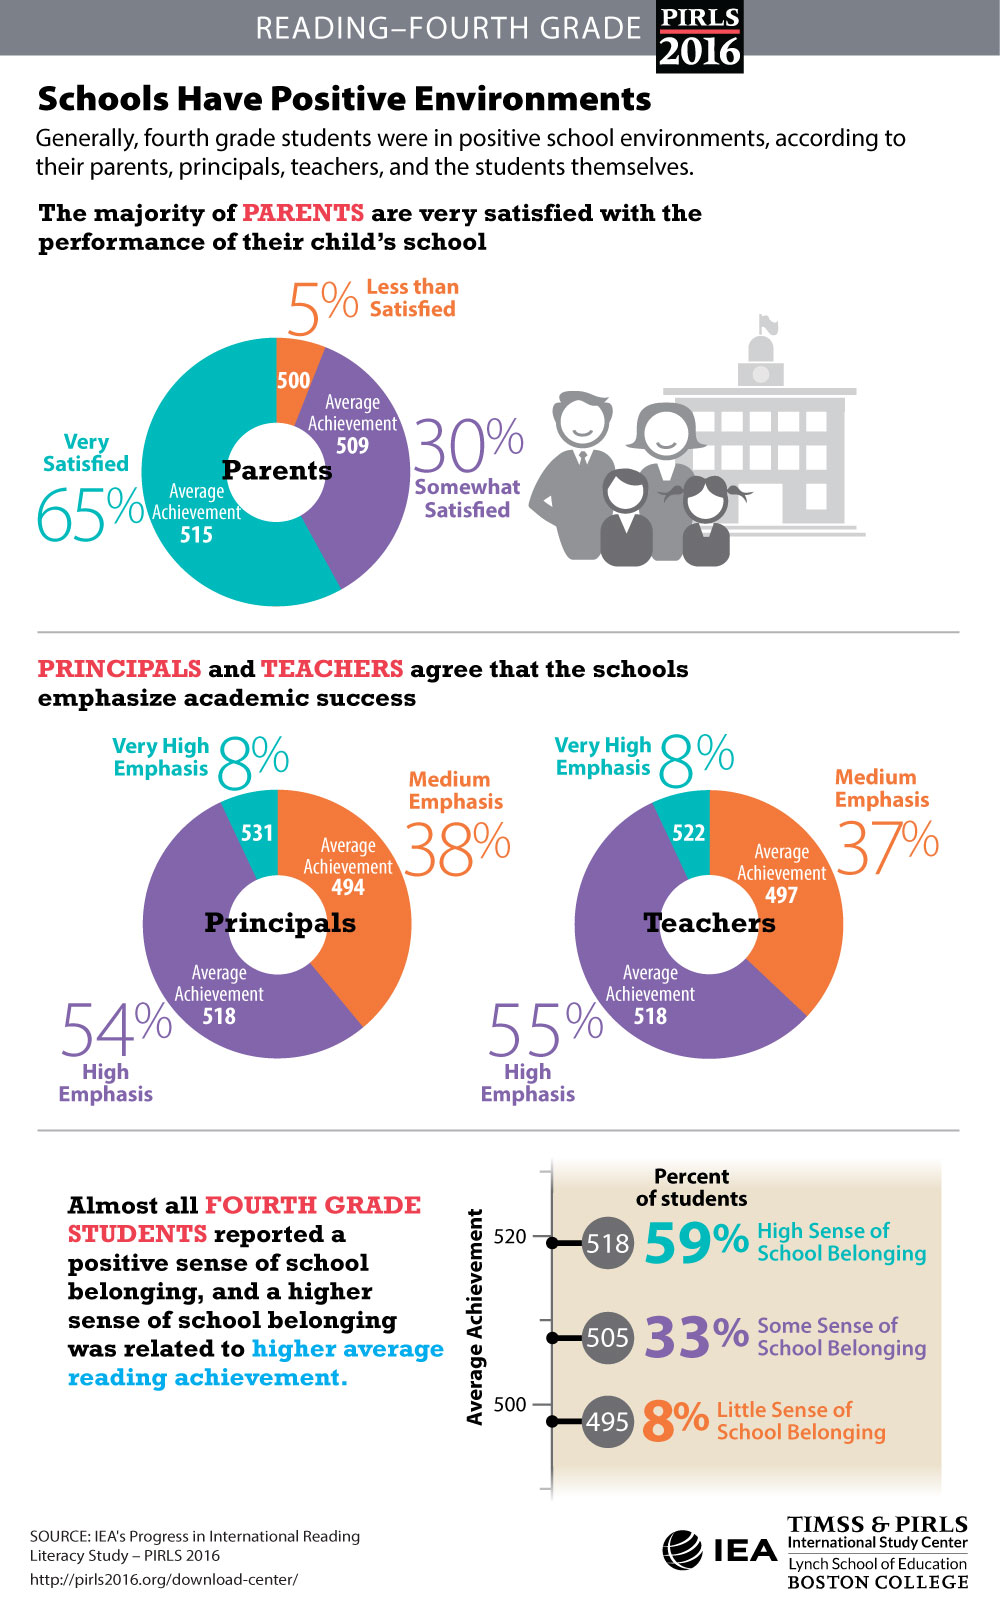 School Climate Infographic